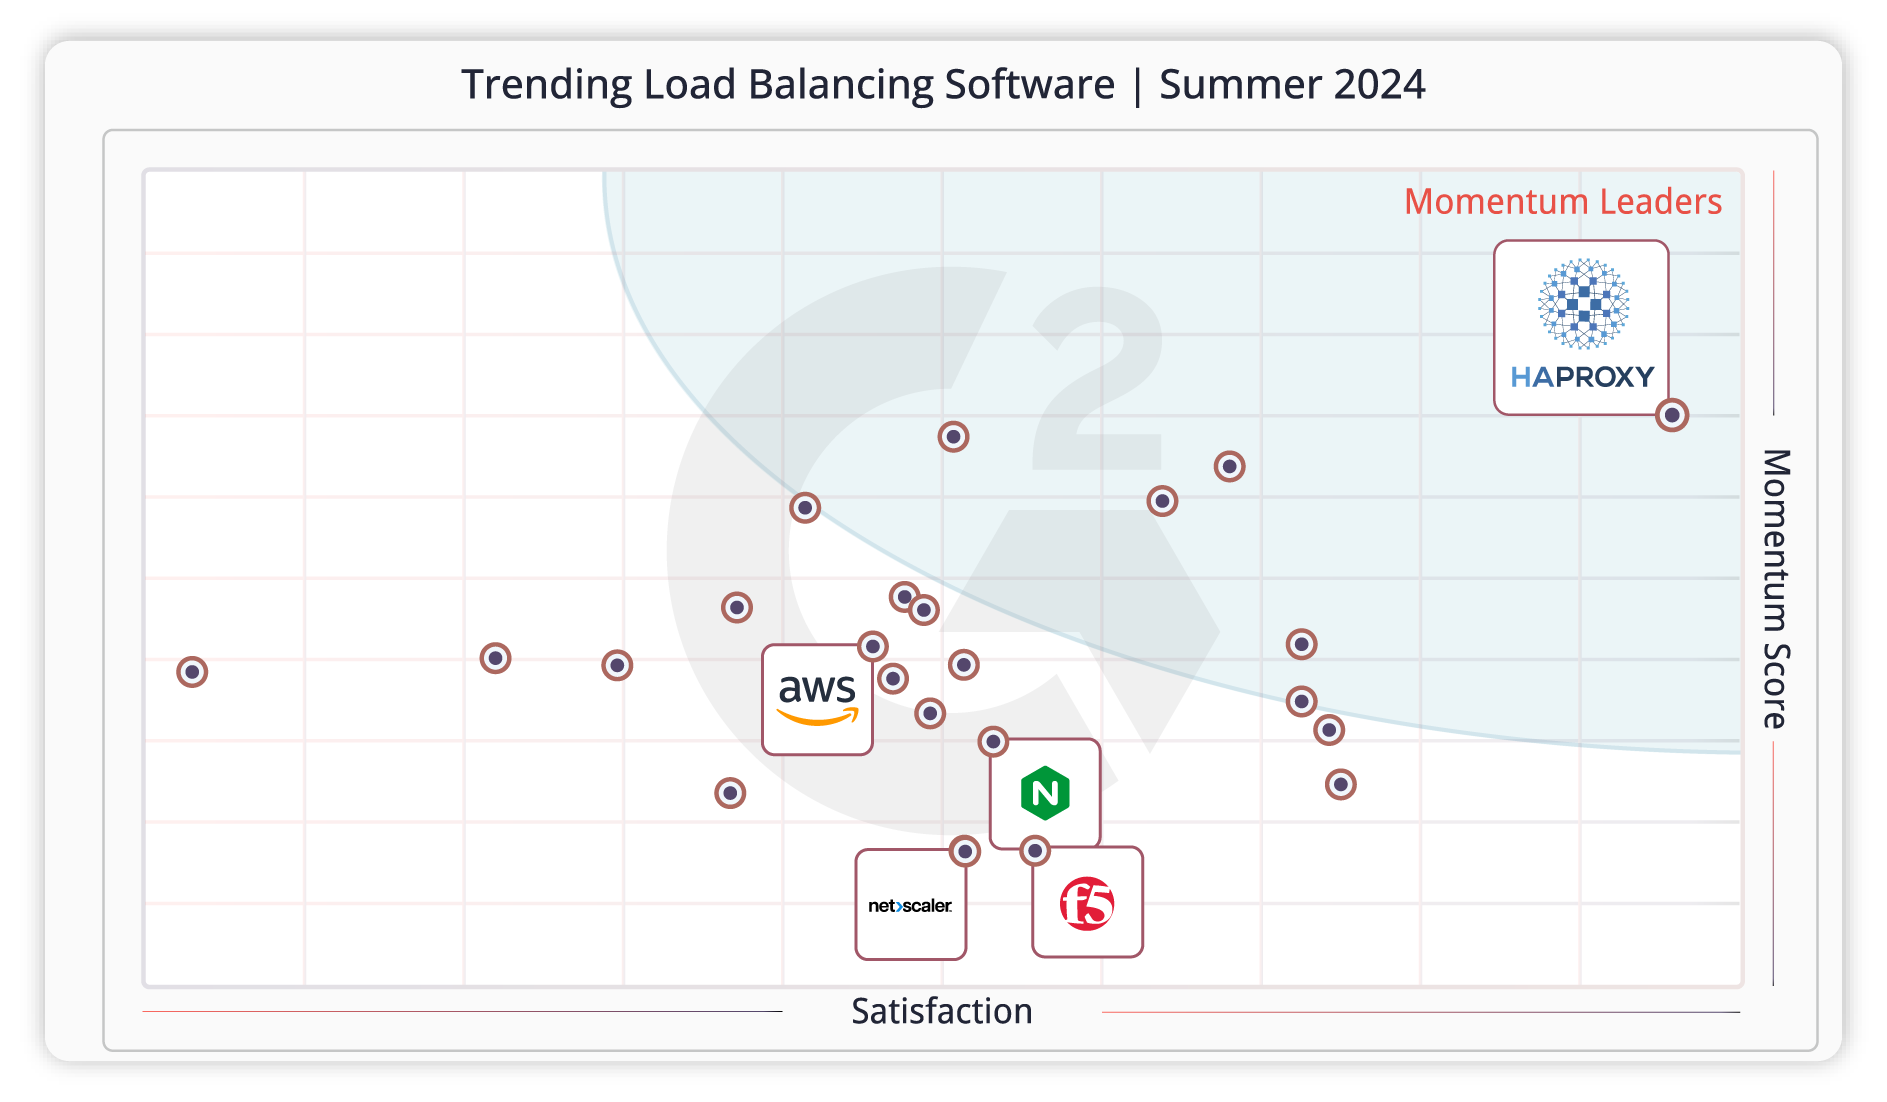 HAProxy Next-Gen Security and Automation Drives New Category Leadership in G2 Summer 2024 Grid® Reports